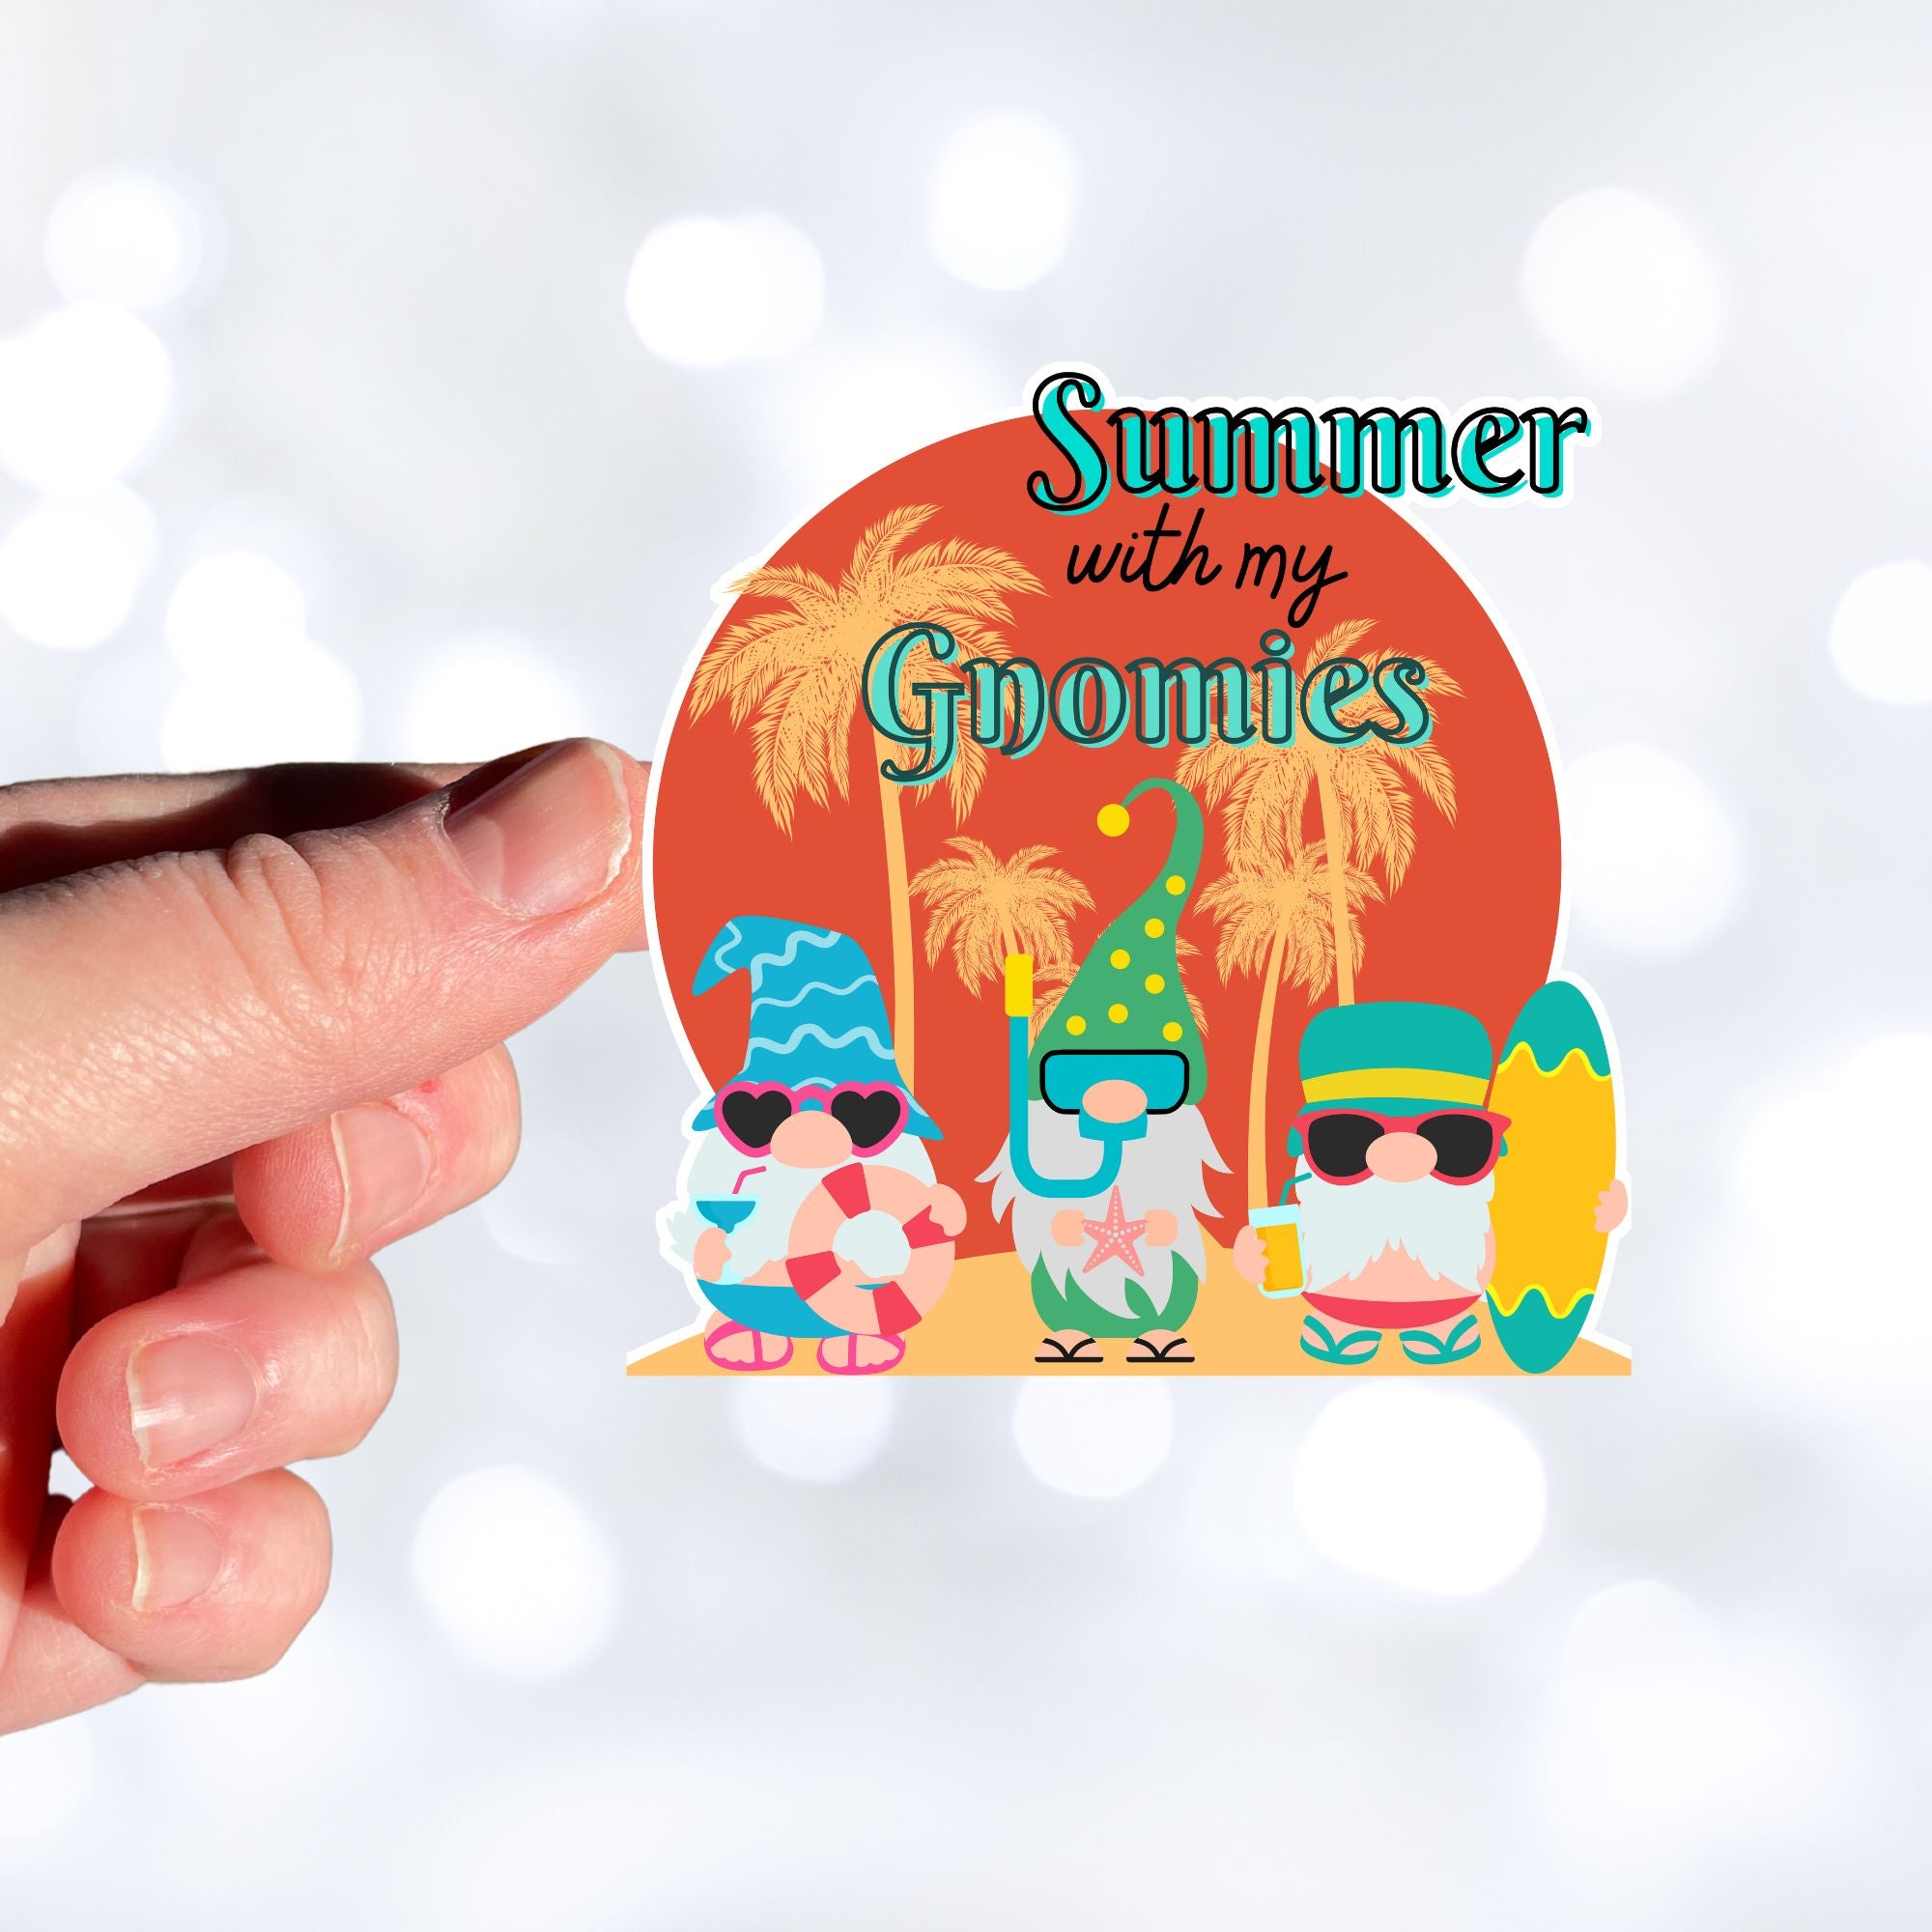 Who doesn't want to chill with their gnomies in the summer? This individual die-cut sticker features three gnome friends who are ready for the beach. They're standing in front of a setting sun silhouetting palm trees. Enjoy! This image shows a hand holding the Summer with my Gnomies sticker.